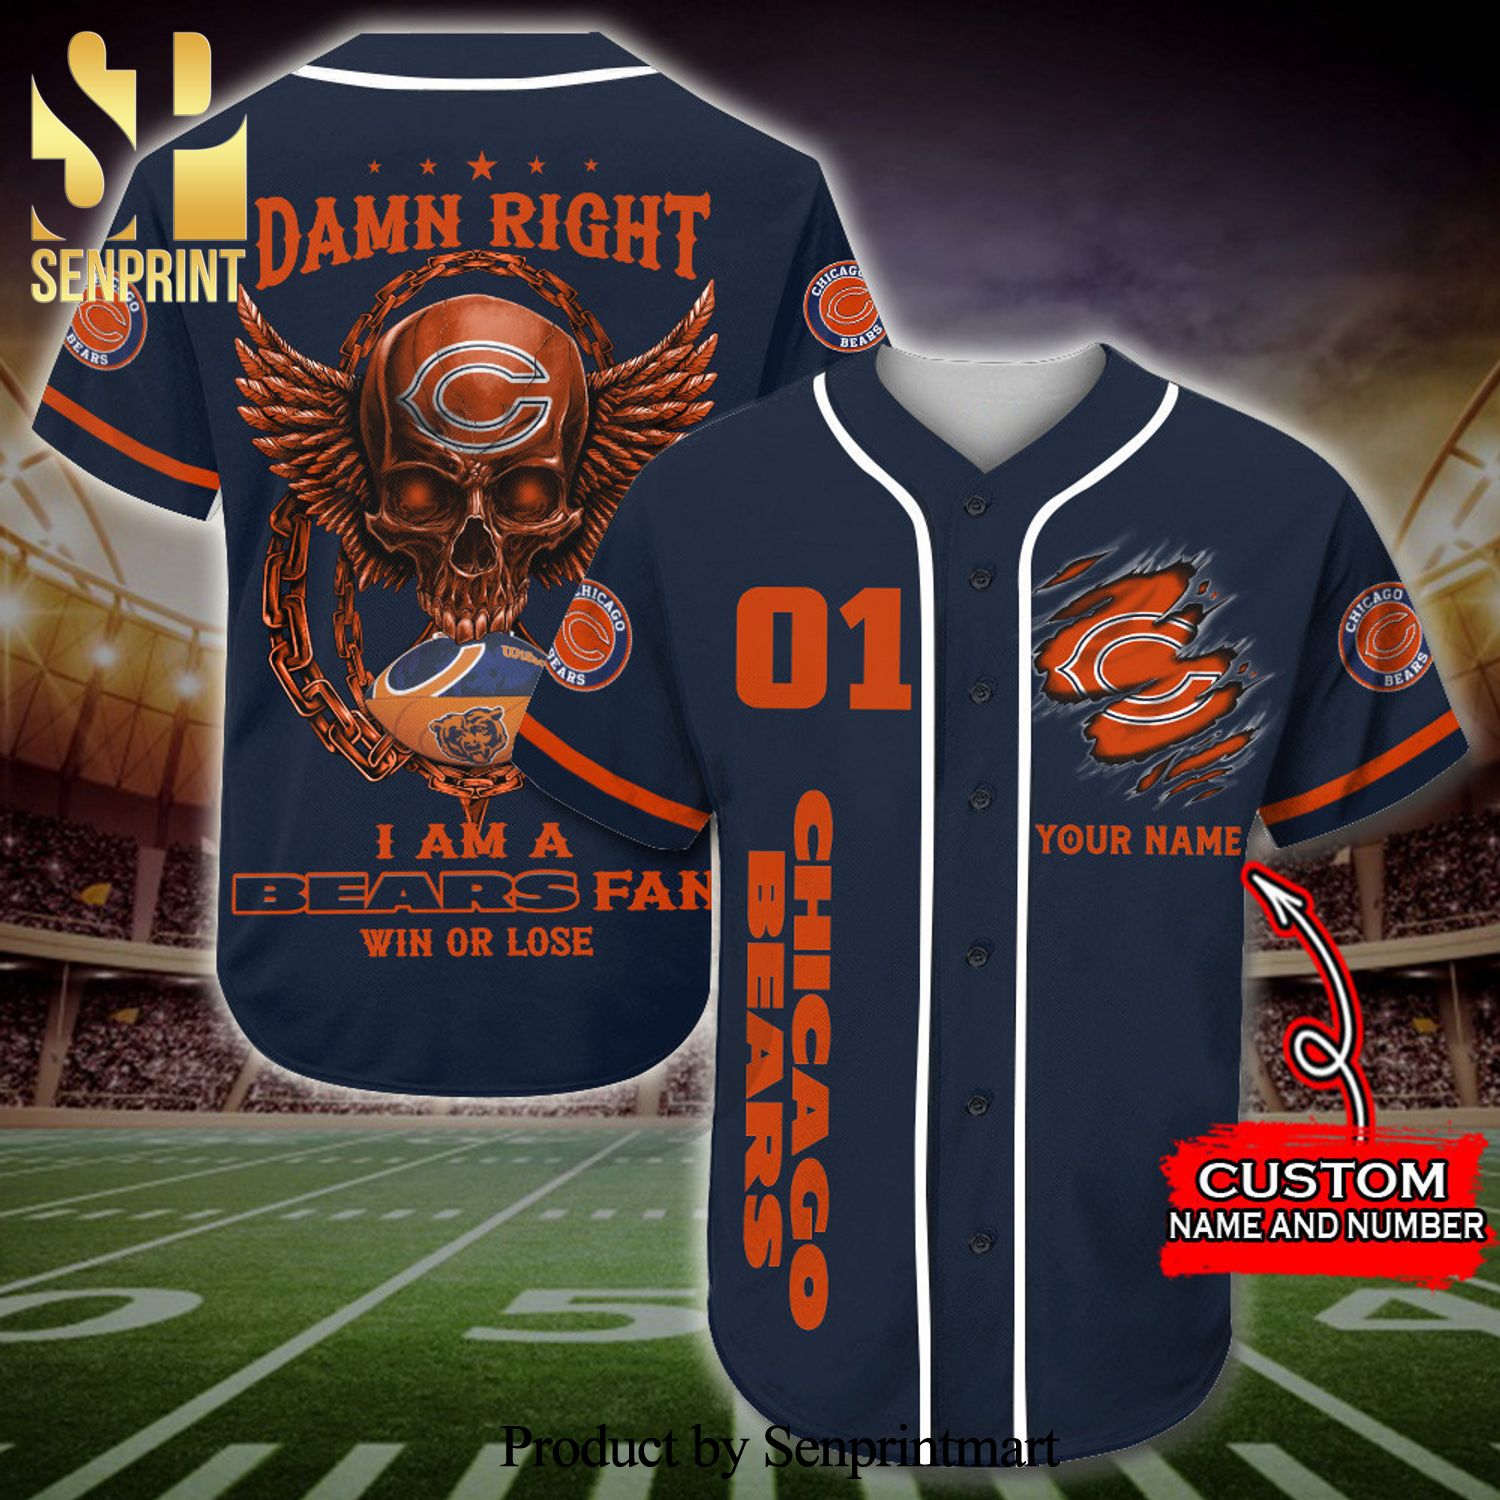 Personalized I Am A Chicago Bears Fan Full Printing Baseball Jersey – Navy